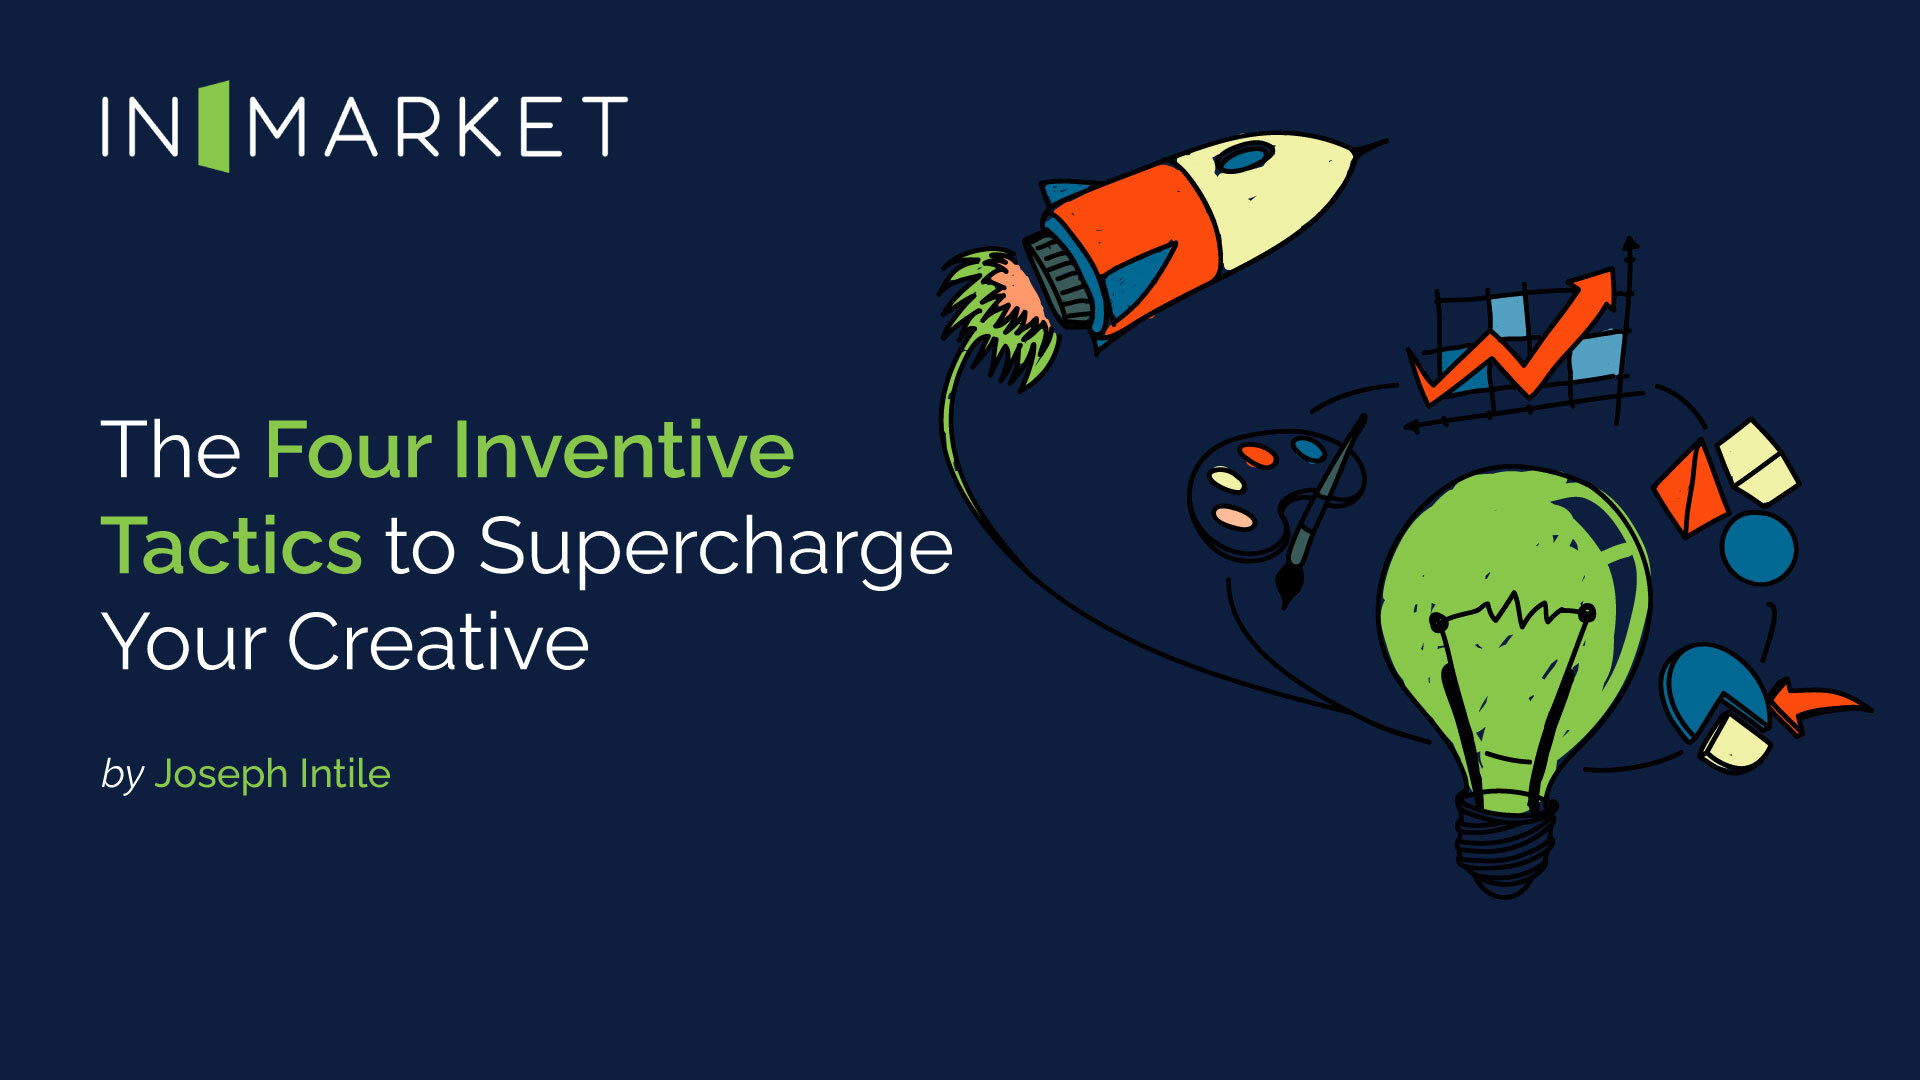 The Four Inventive Tactics to Supercharge Your Creative